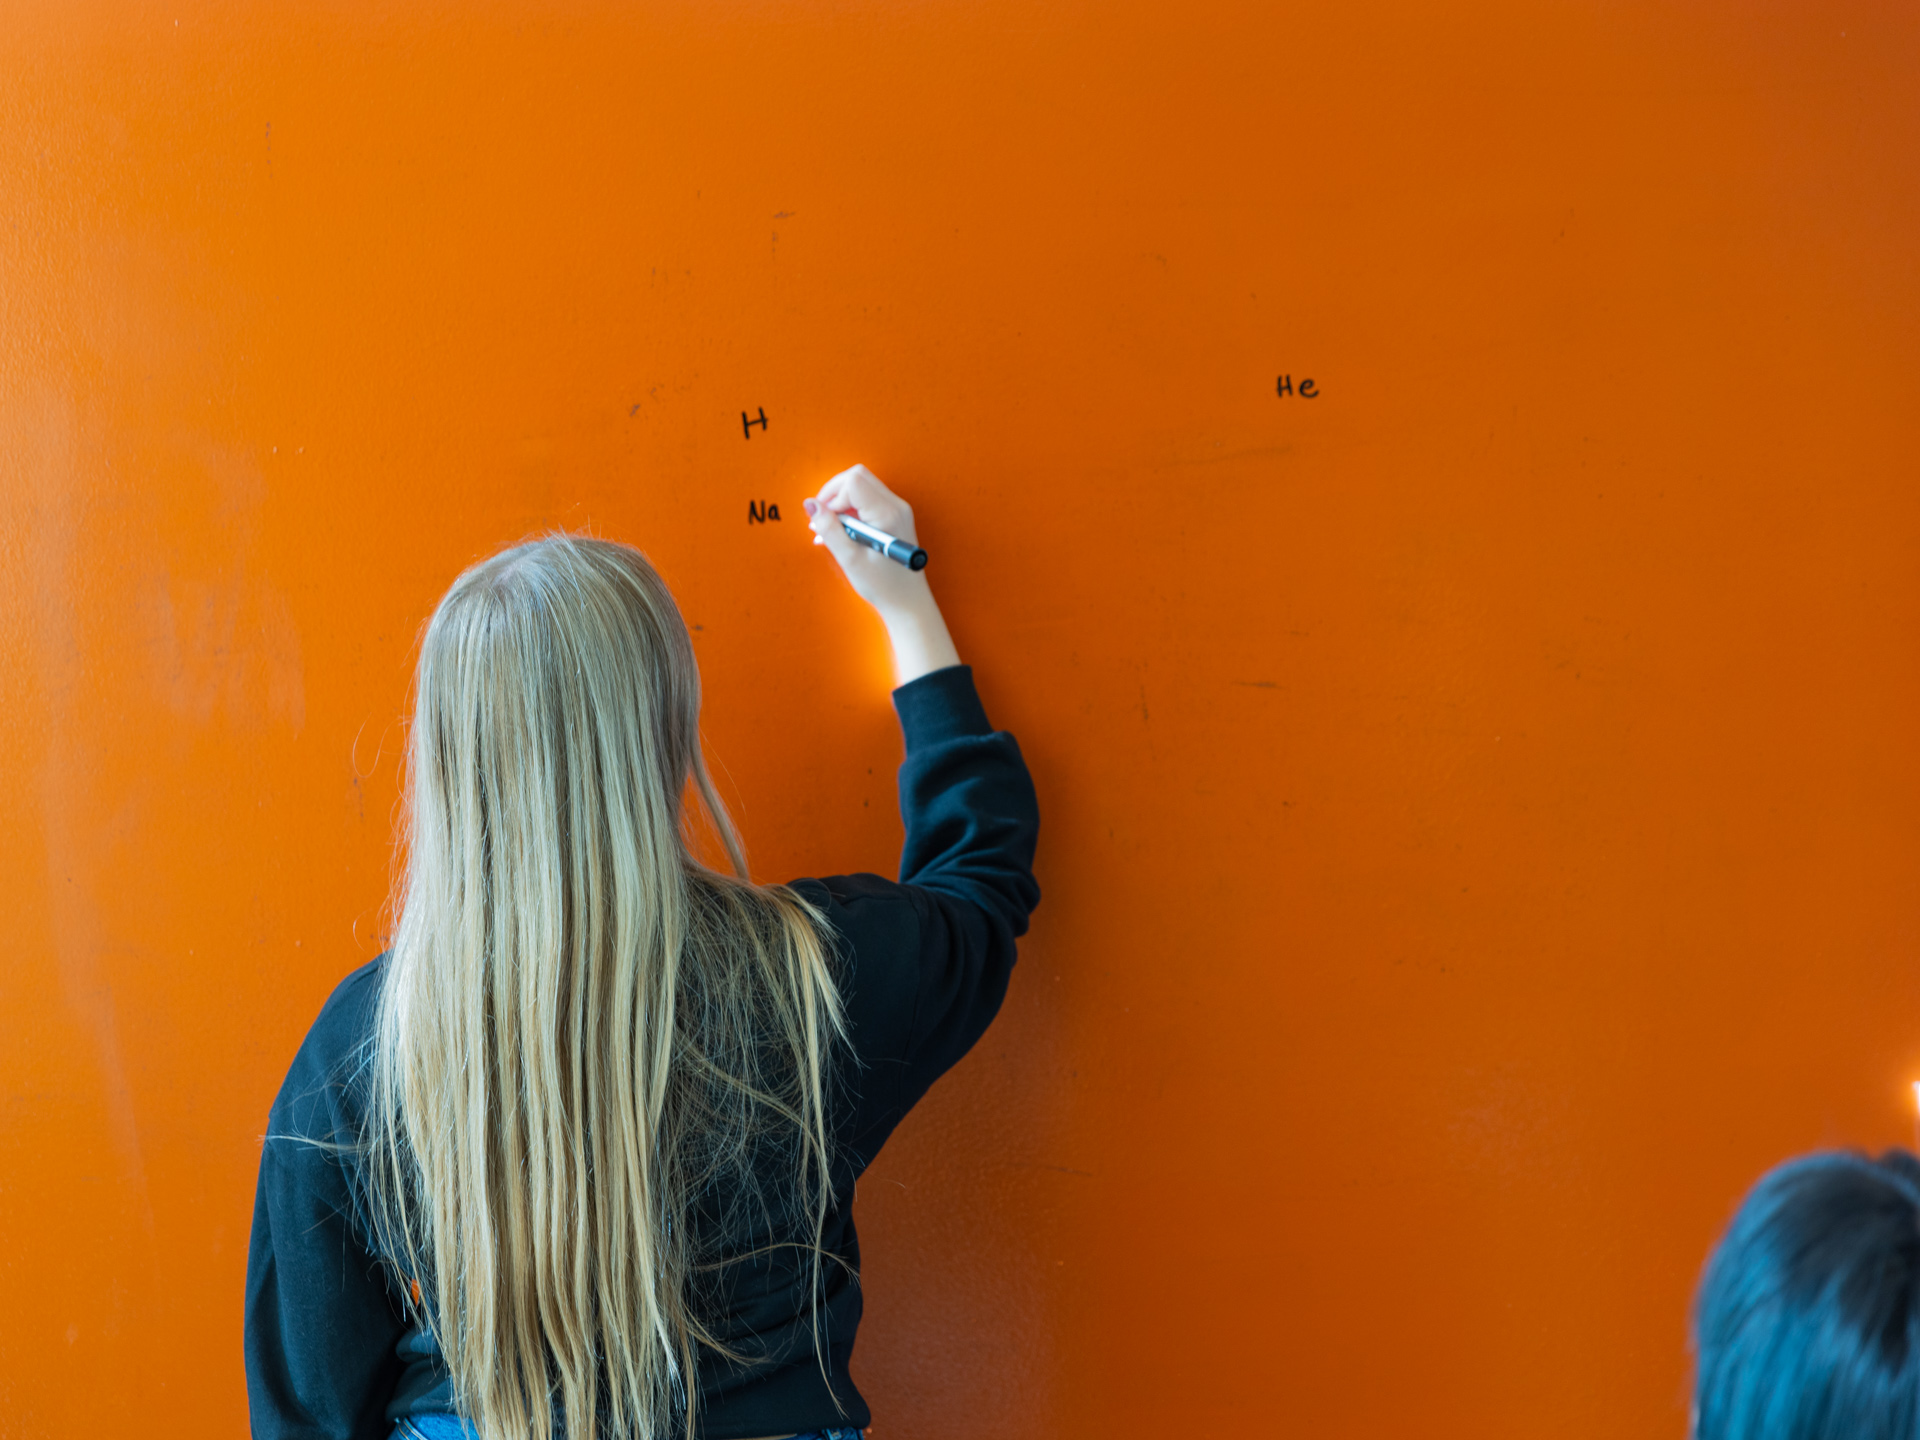 Shot of a blonde woman from behind writing on an orange wall thanks to business development services in Lawrence